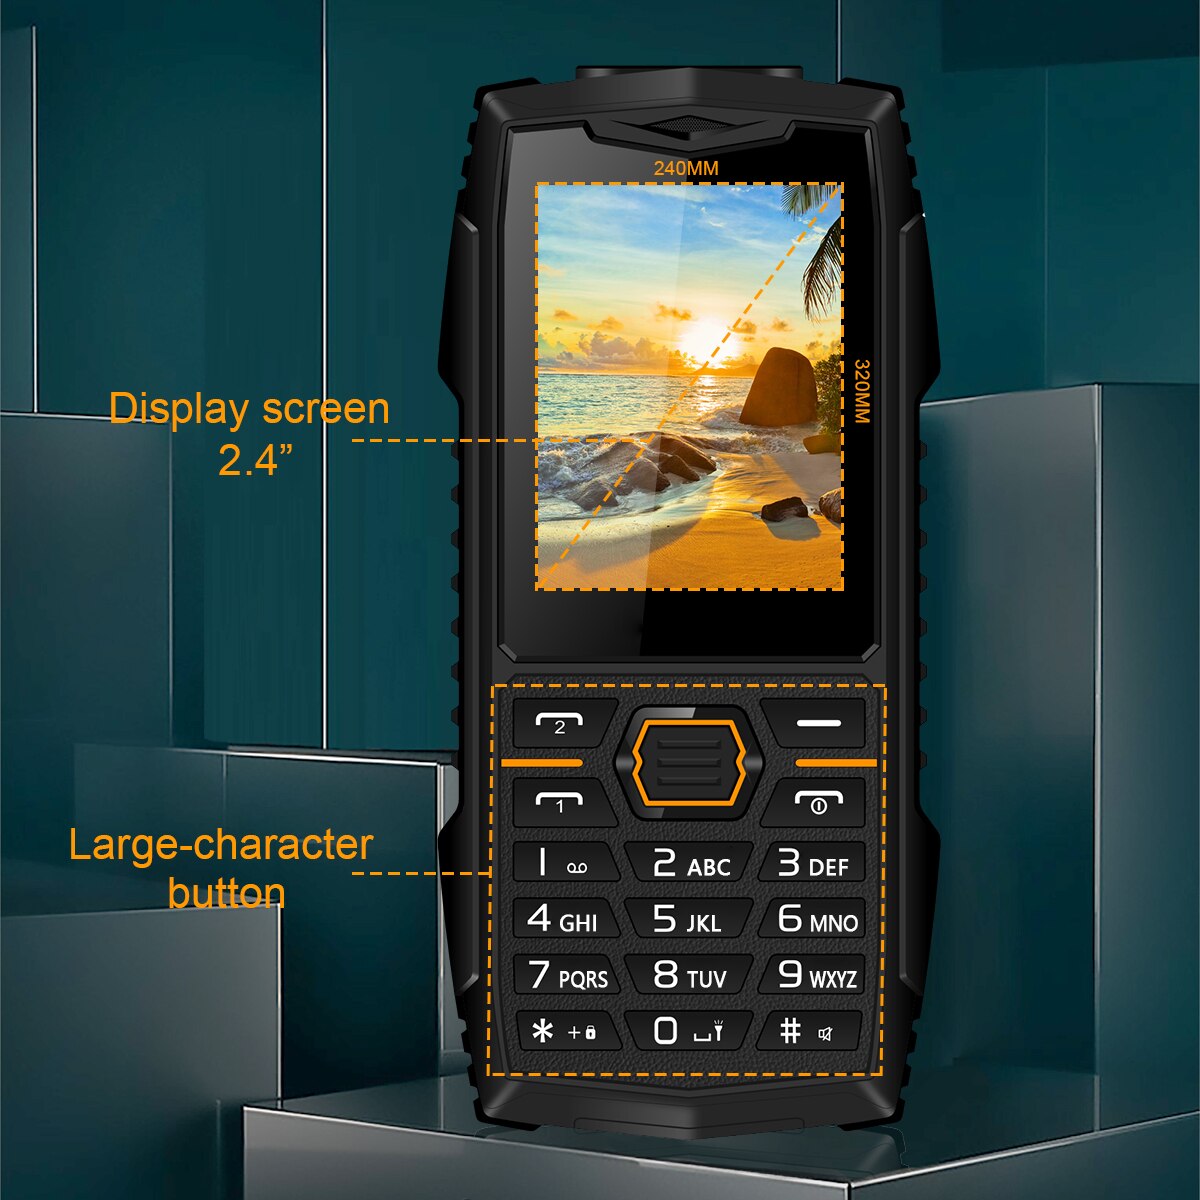 GSM 2G Waterproof Rugged Phone Big Battery Feature Phone Dual SIM Dual Standby Bar Phone Push-button Telephone with Super Torch